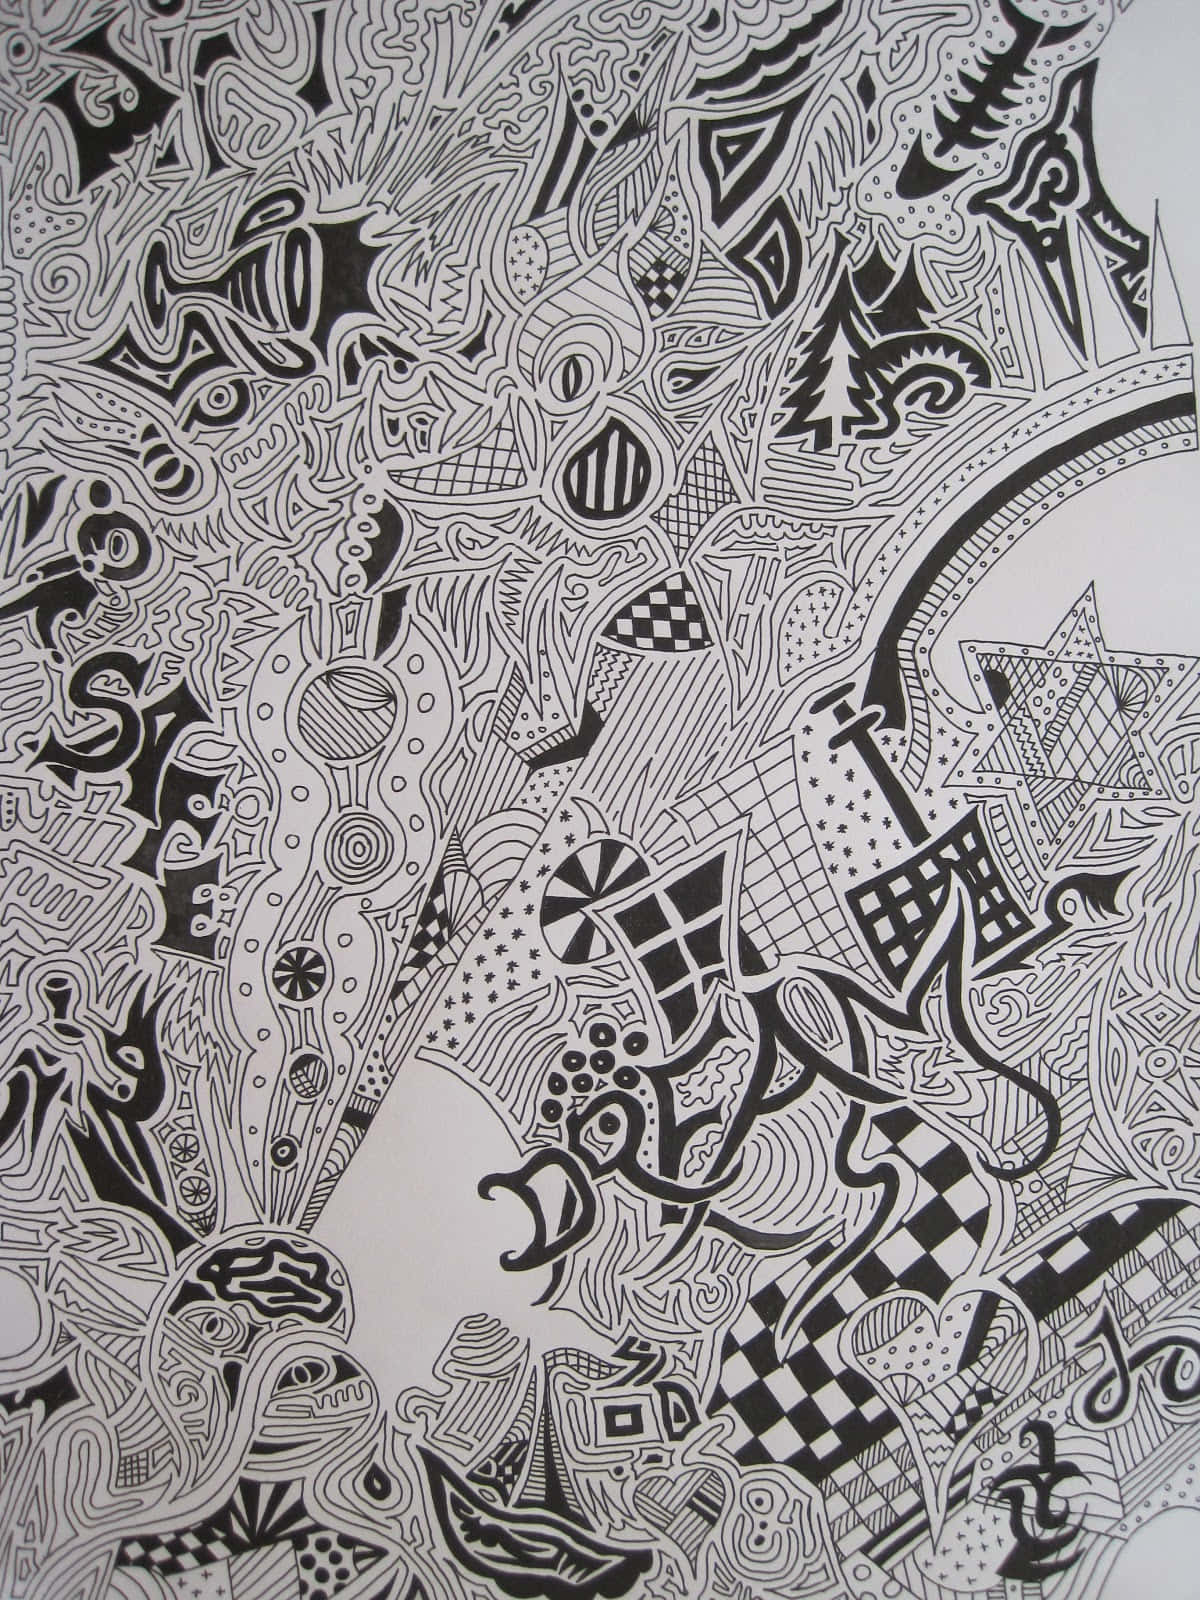 An artful doodle day